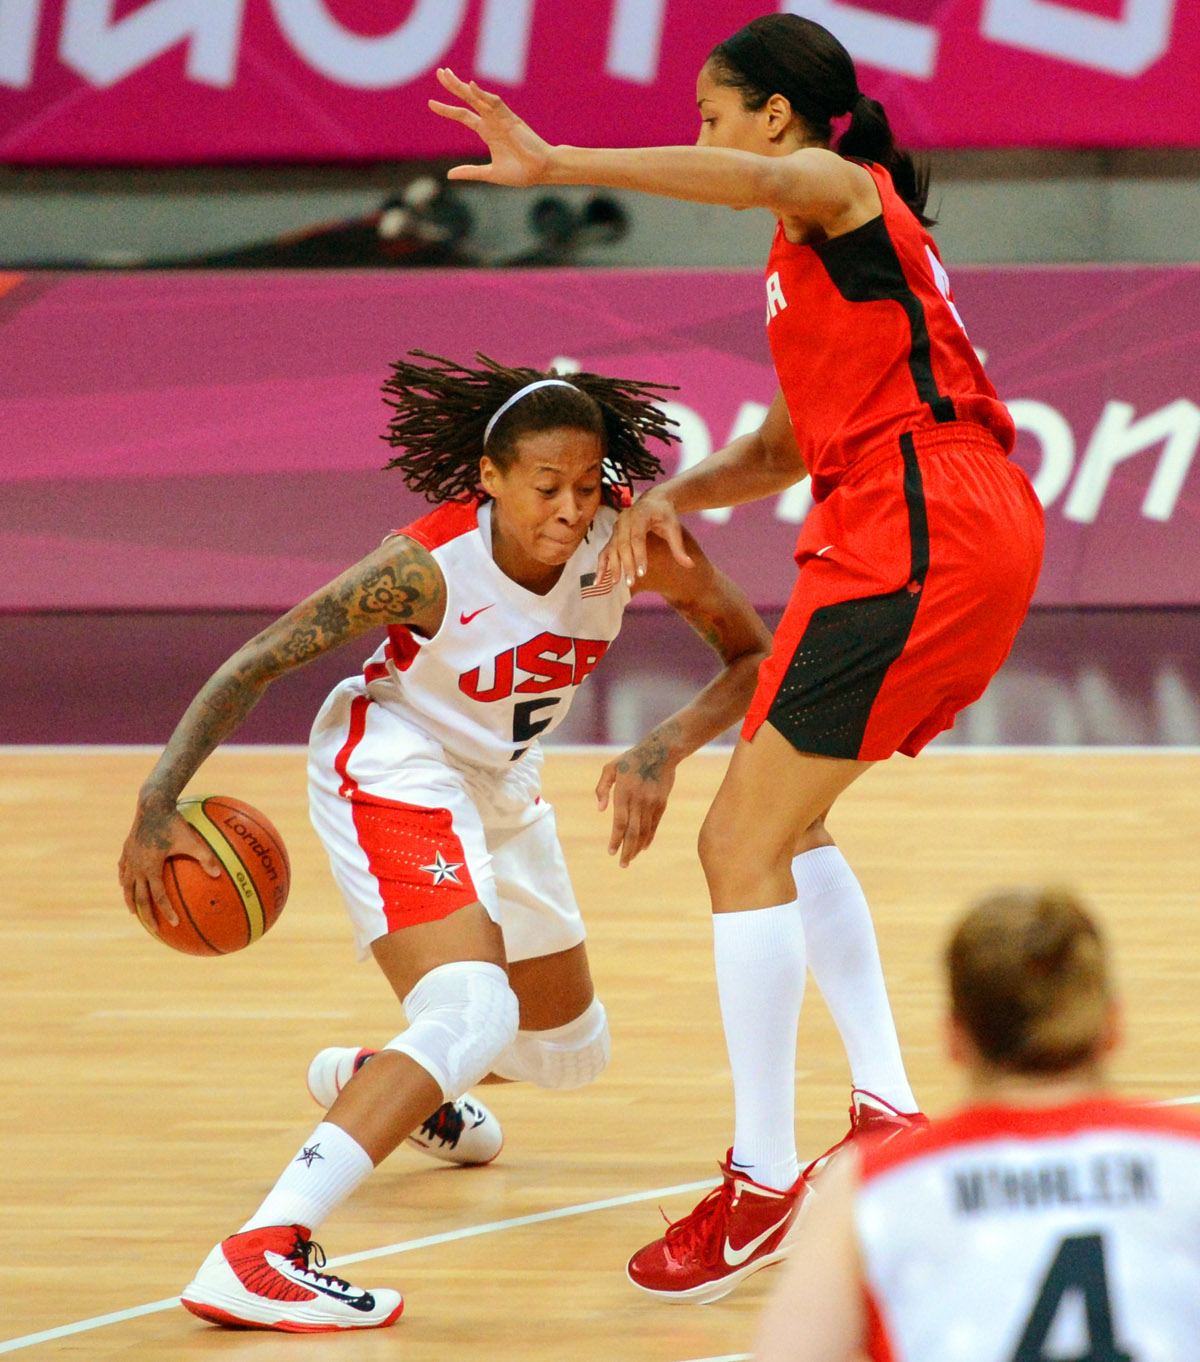 USA Seimone Augustus dribbles past Canada defender in the first quarter of the quarter final game of the women's basketball competition. The USA went on to win 91-48.(AP Photo/Dick Druckman)